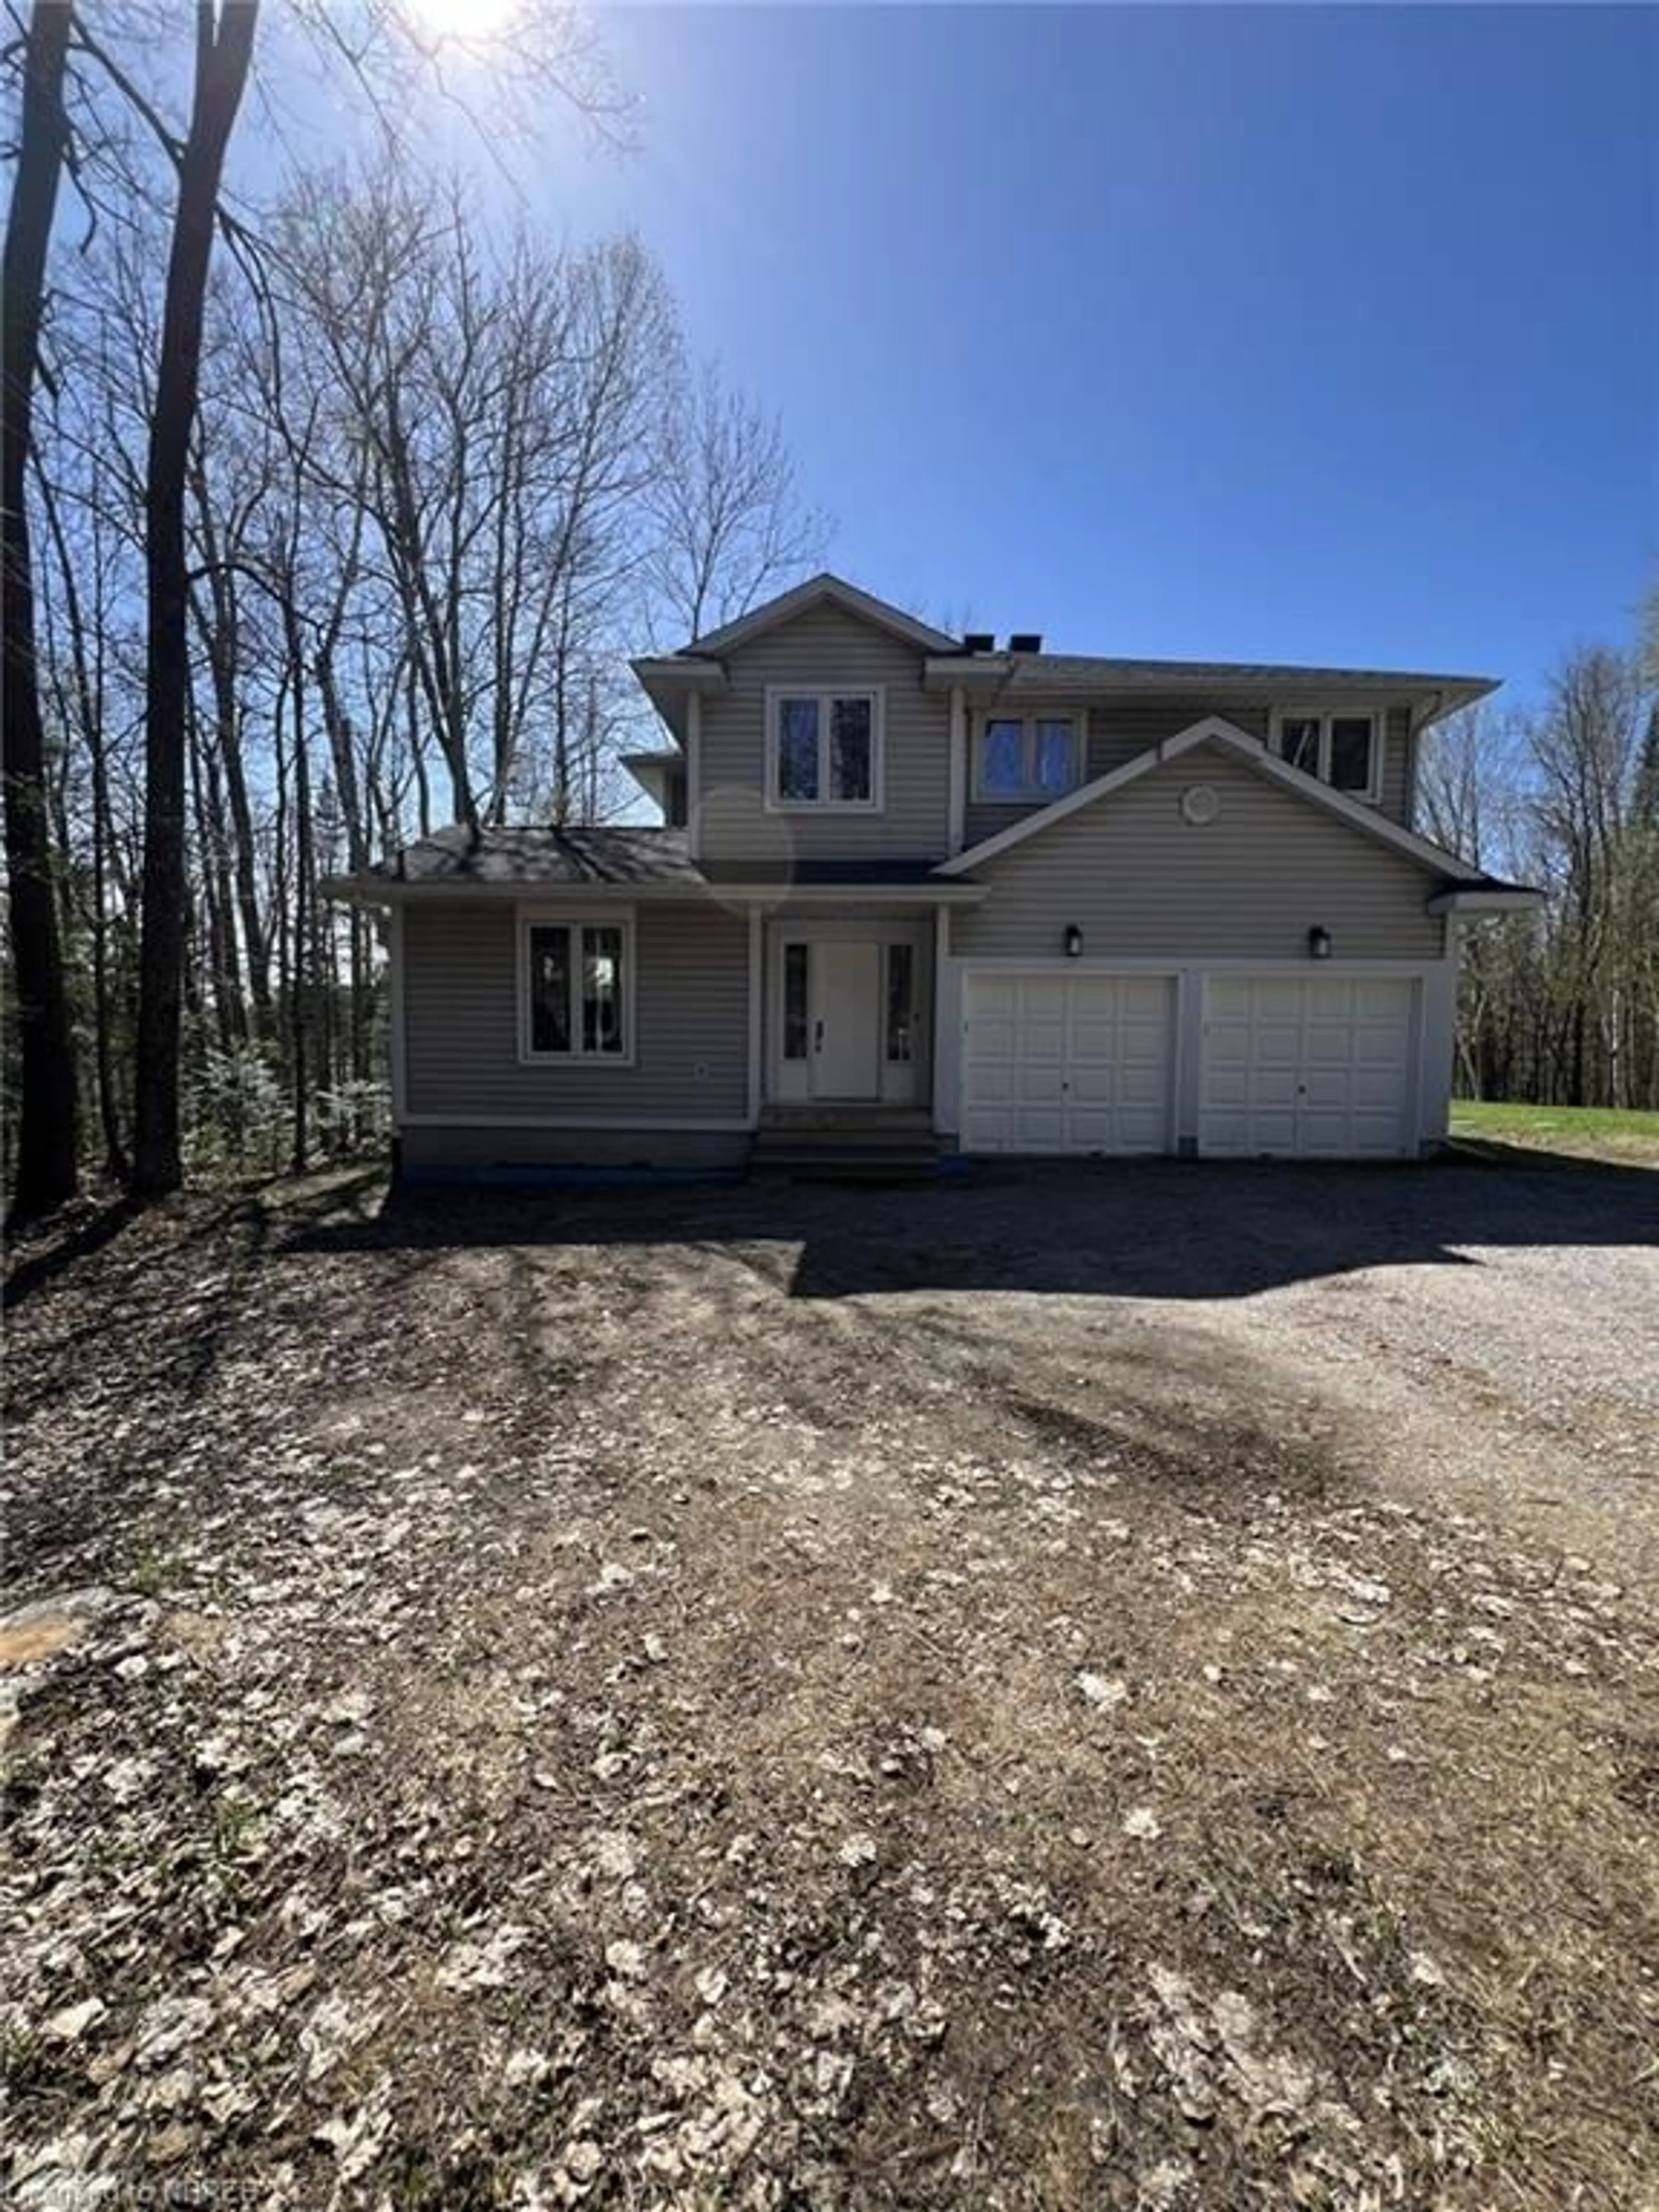 Frontside or backside of a home for 2431 Northshore Rd, North Bay Ontario P1B 8G4